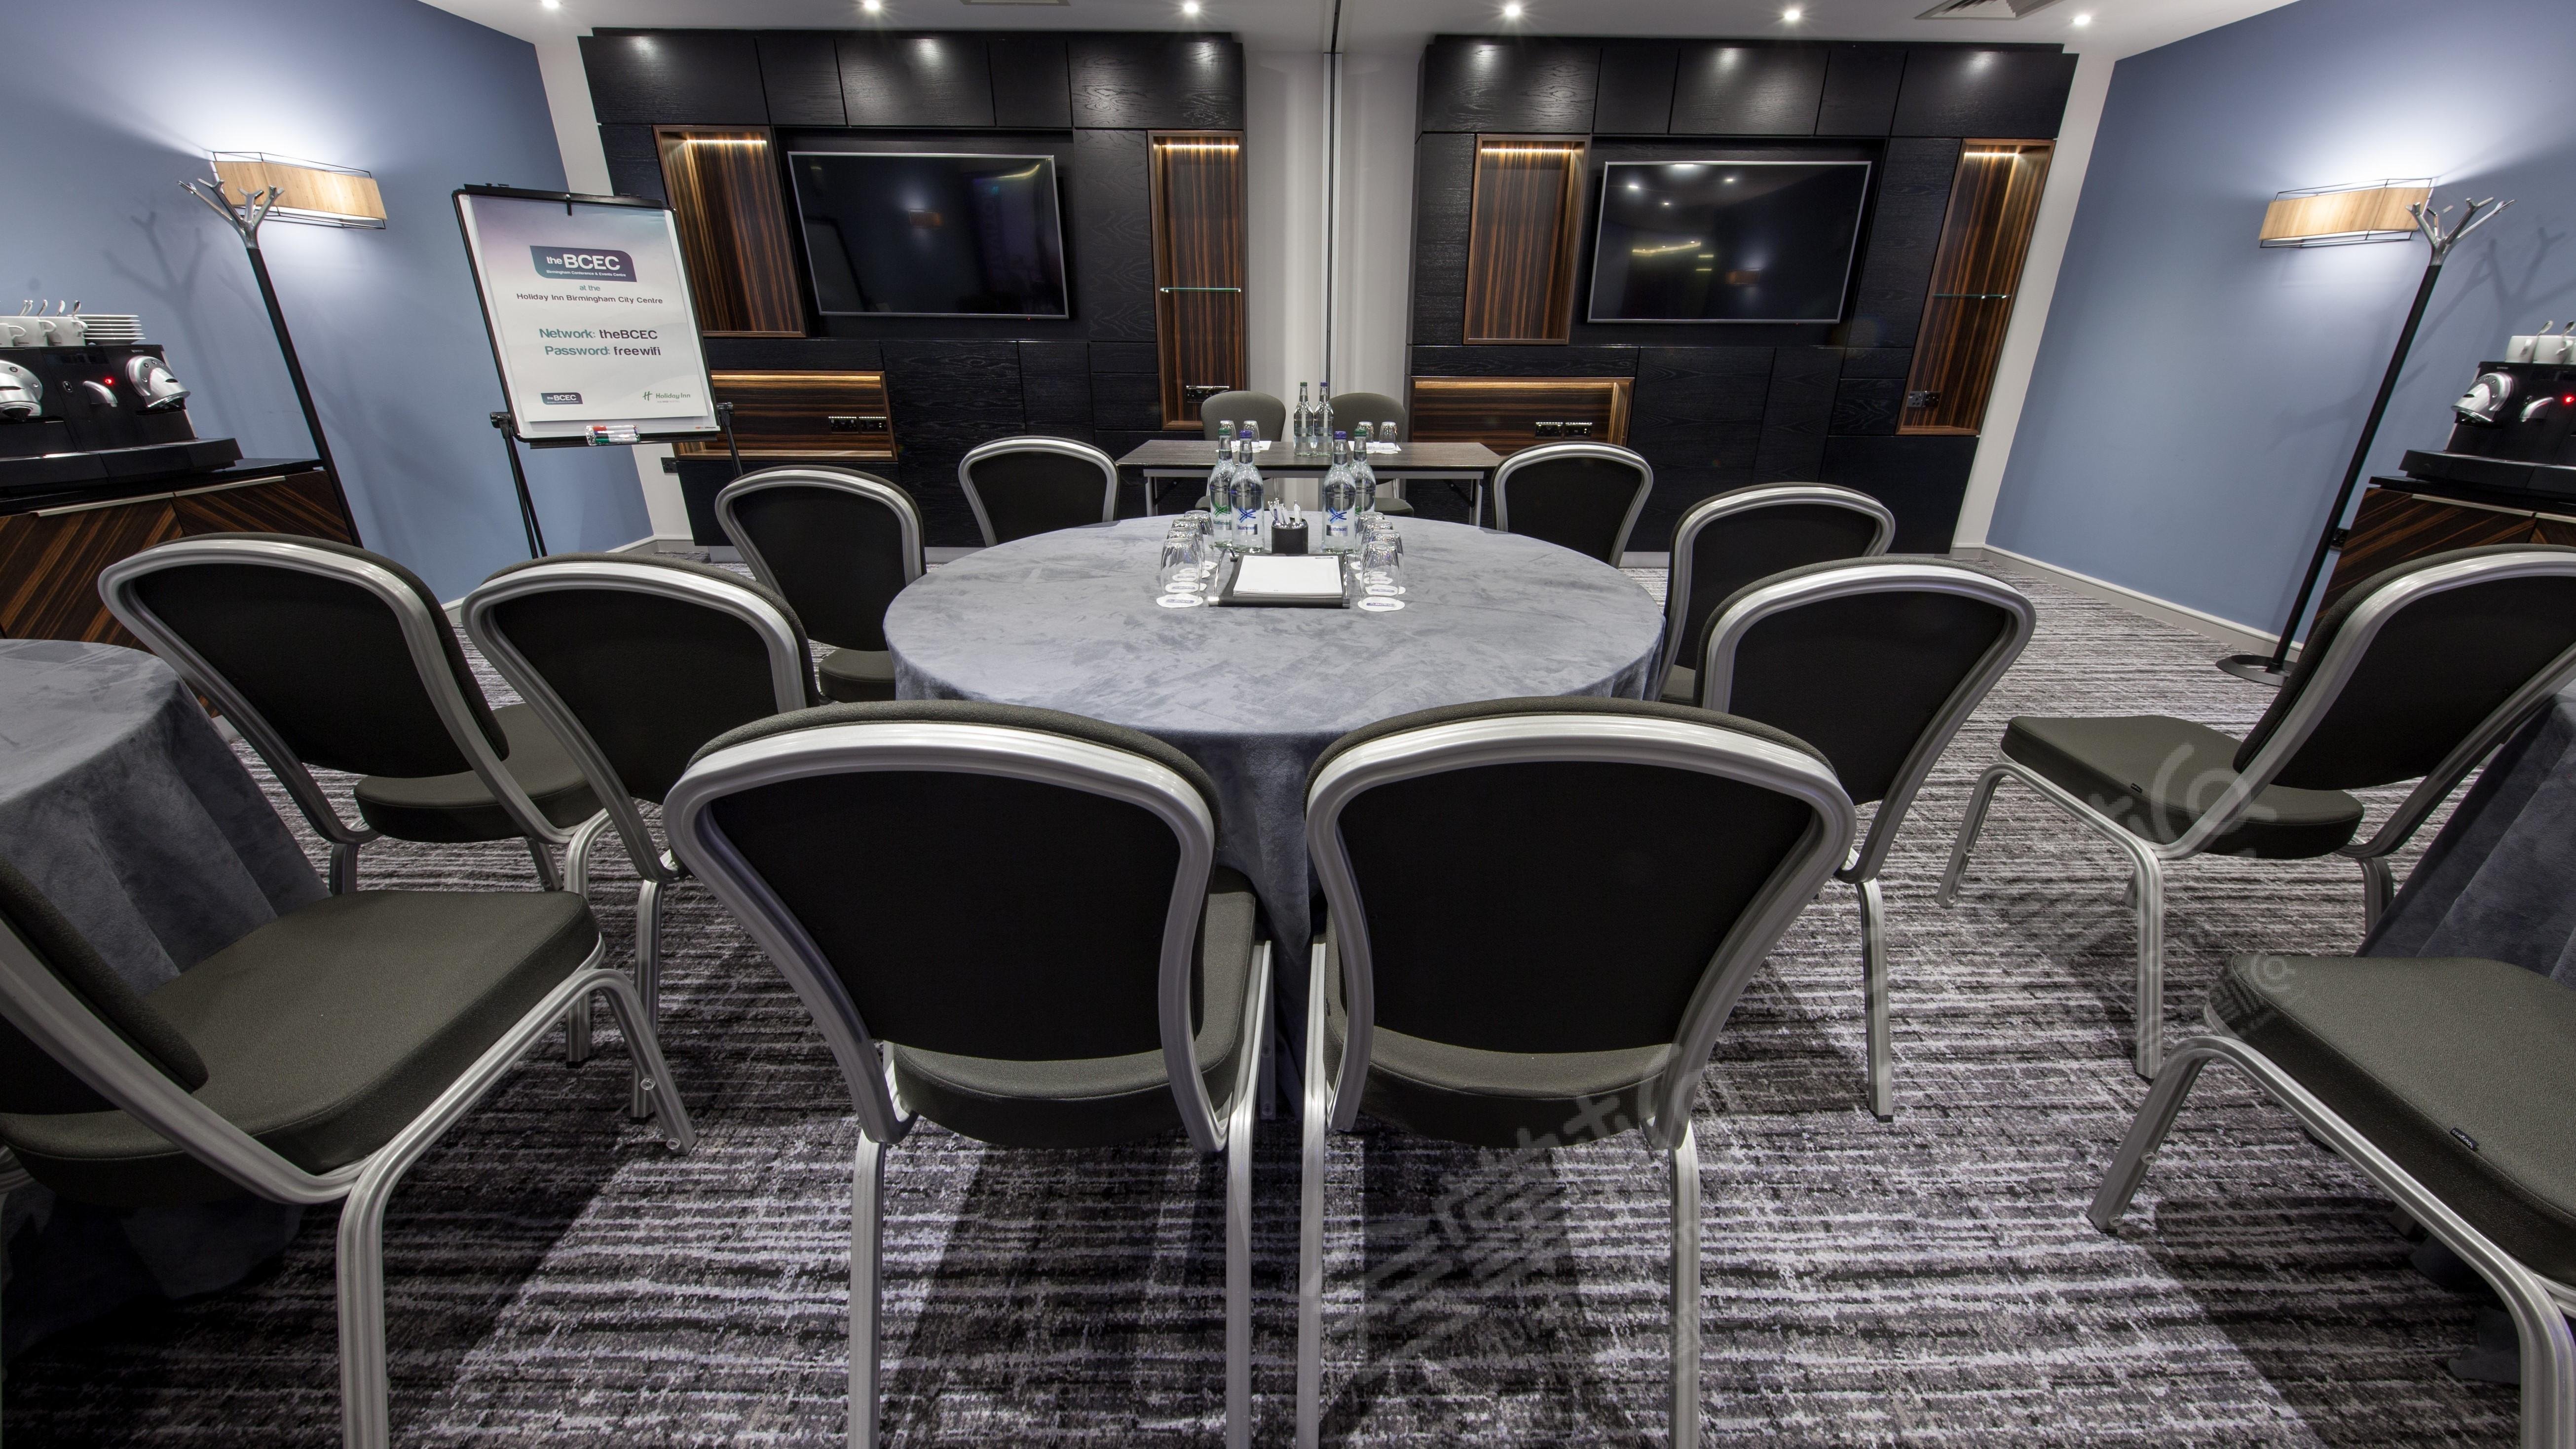 The Birmingham Conference and Events Centre at the Holiday Inn Birmingham City Centre15